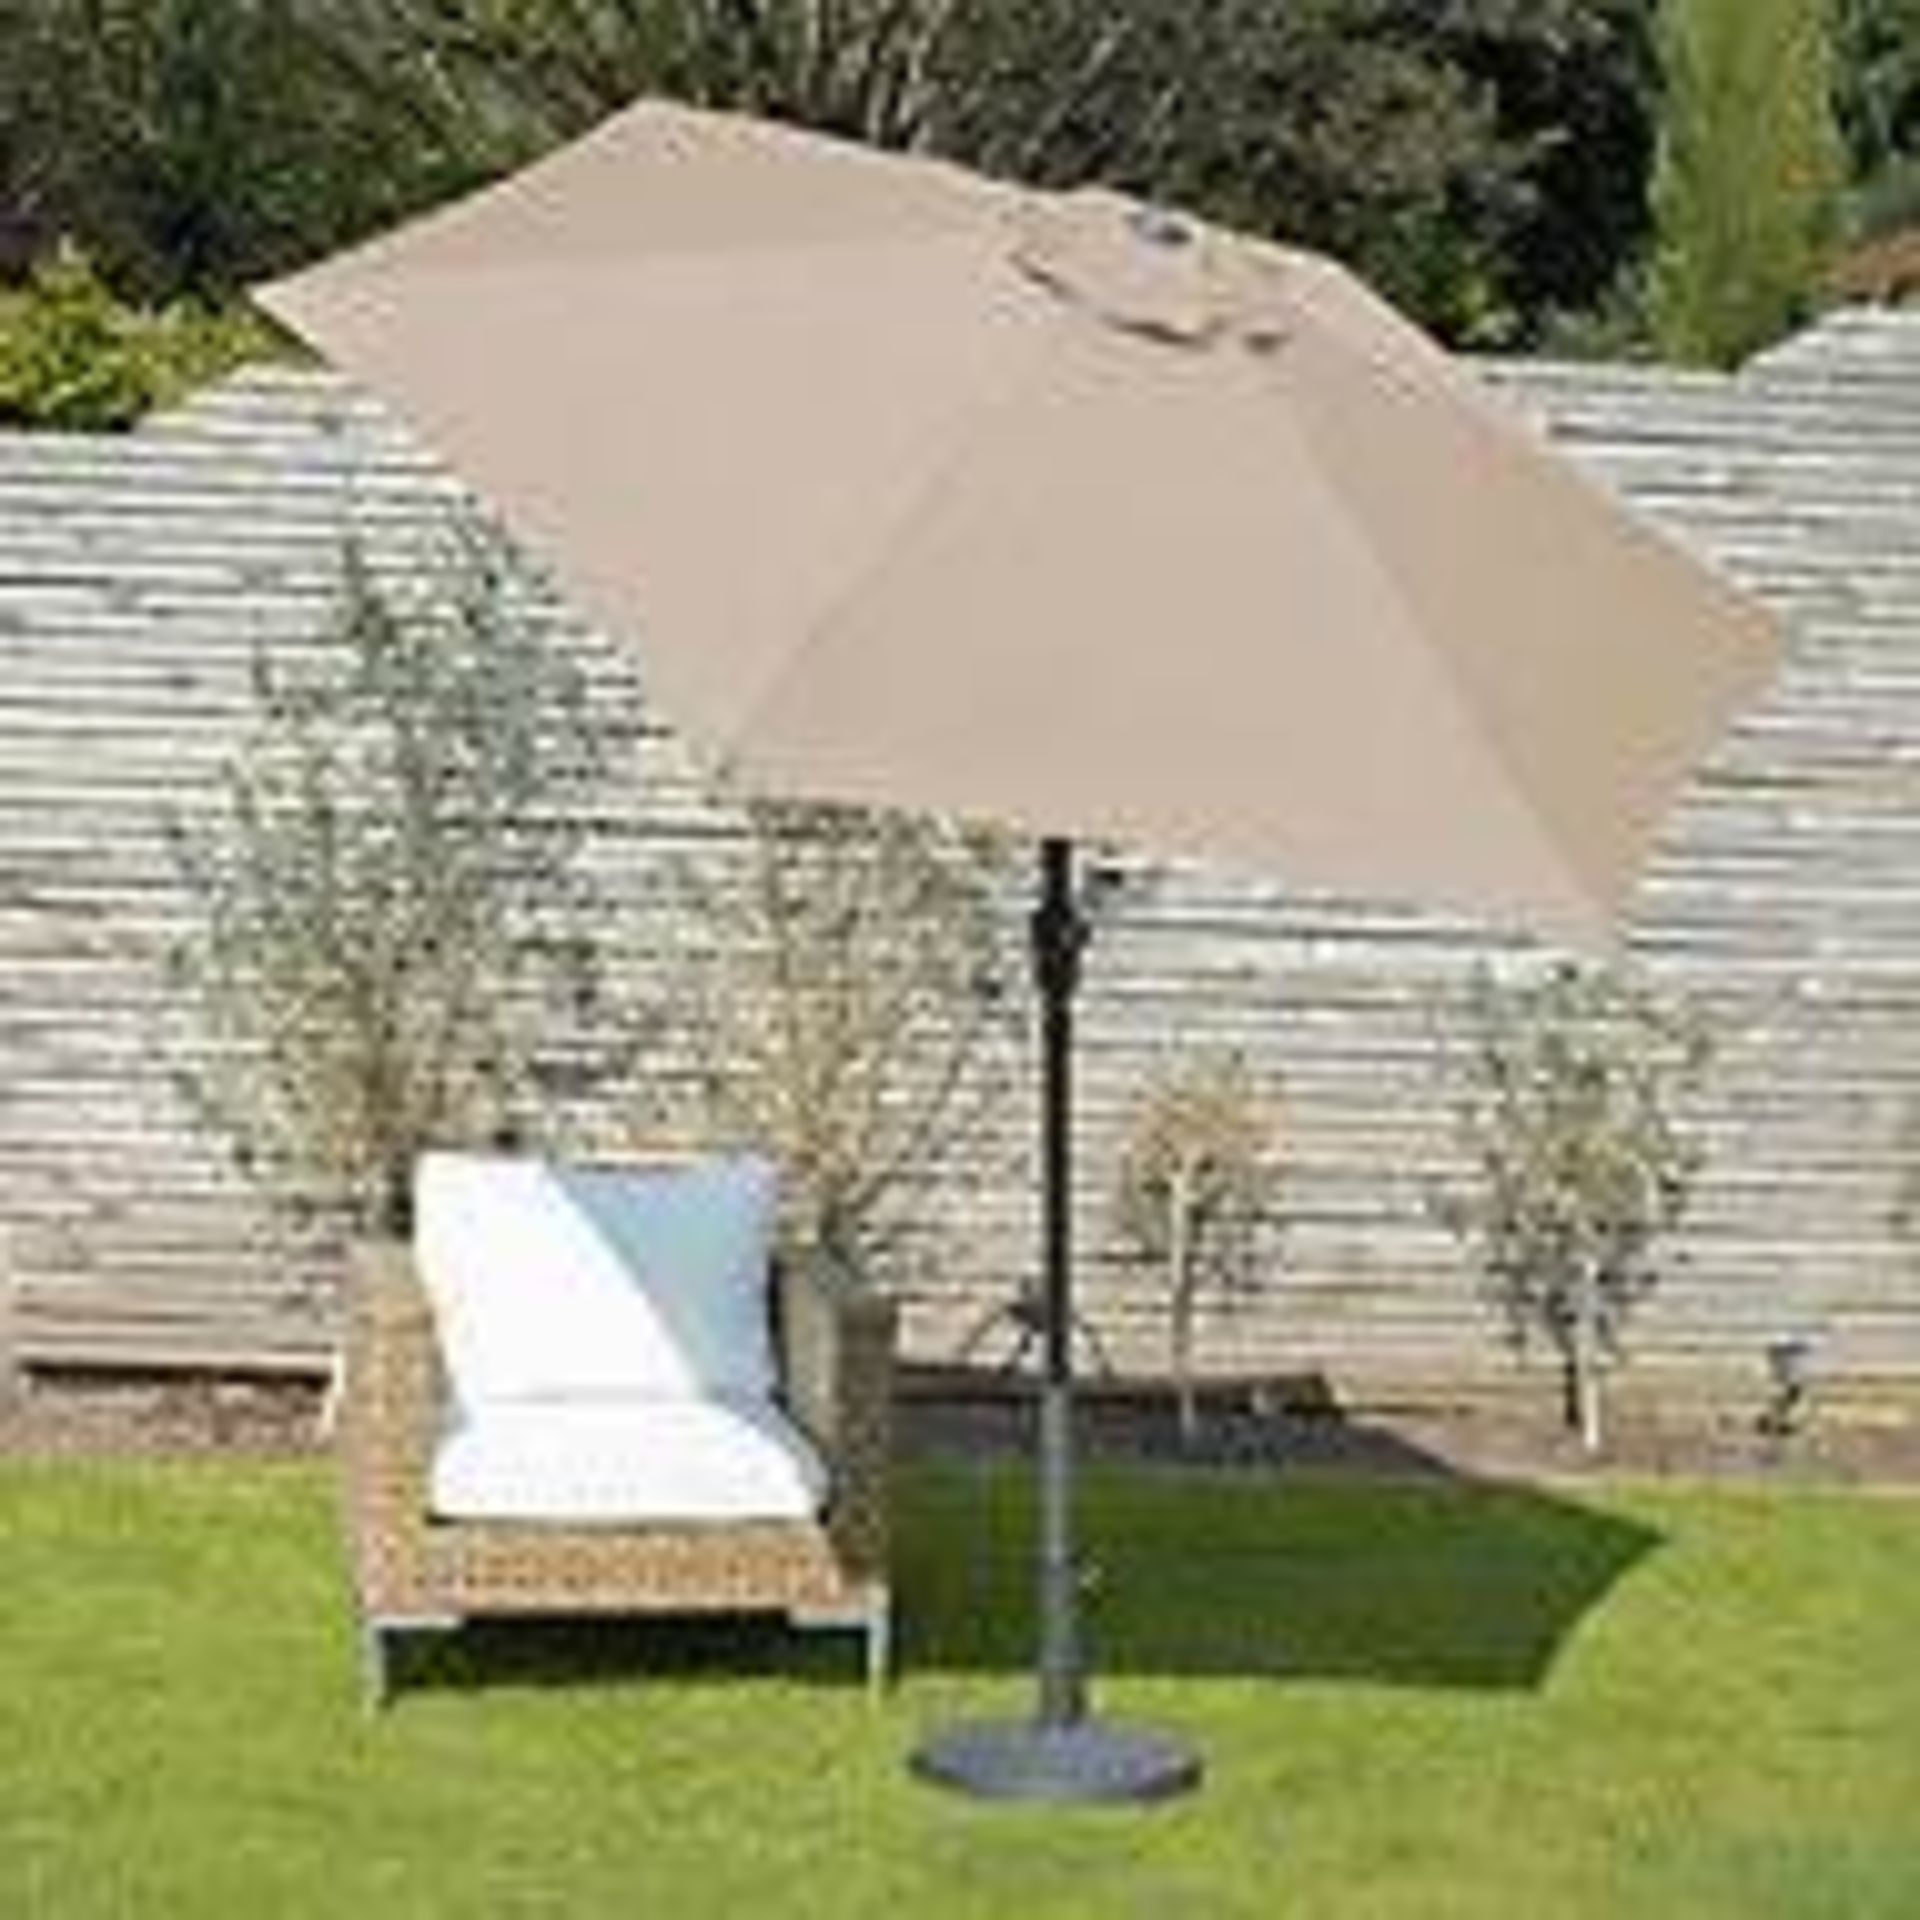 New & Boxed Luxury 2.5m Sand Overhanging Parasol- Sand. This square overhanging parasol provides - Image 2 of 8